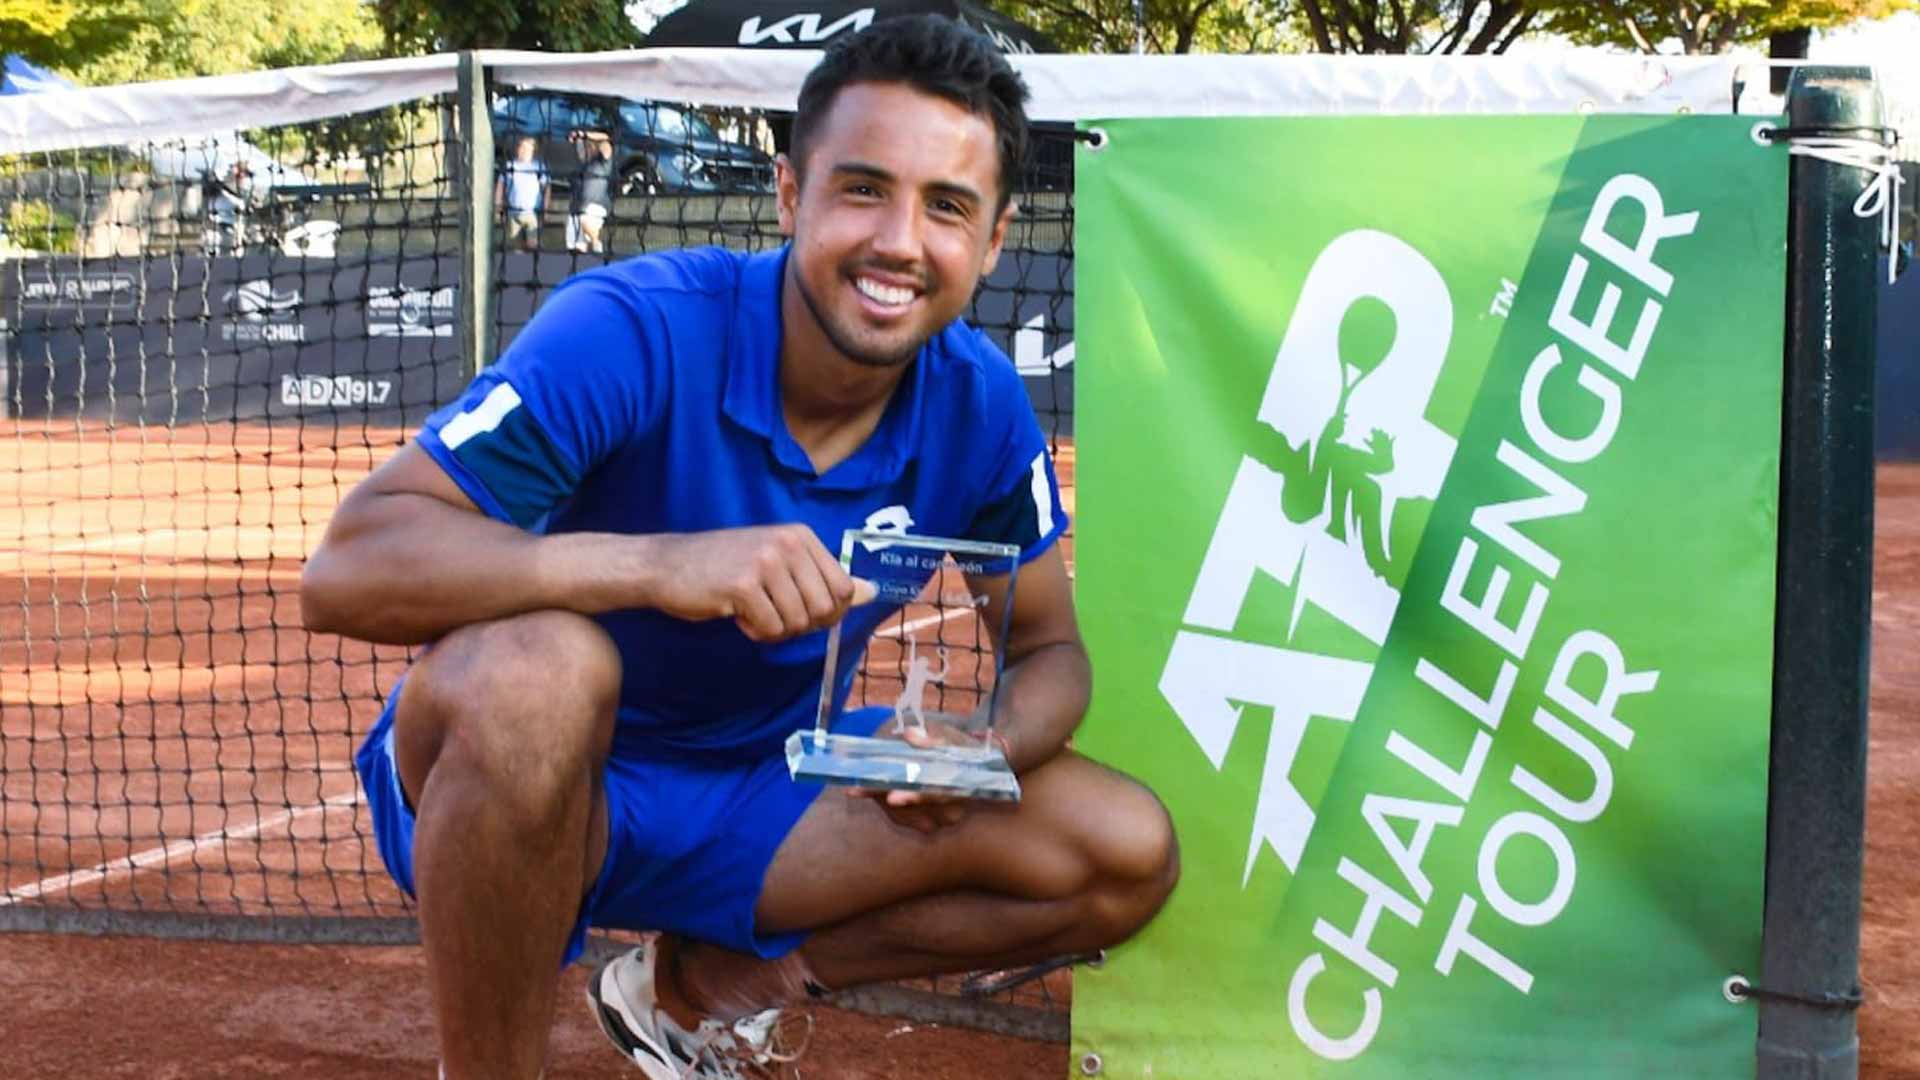 Hugo Dellien collects the title at the Santiago Challenger.